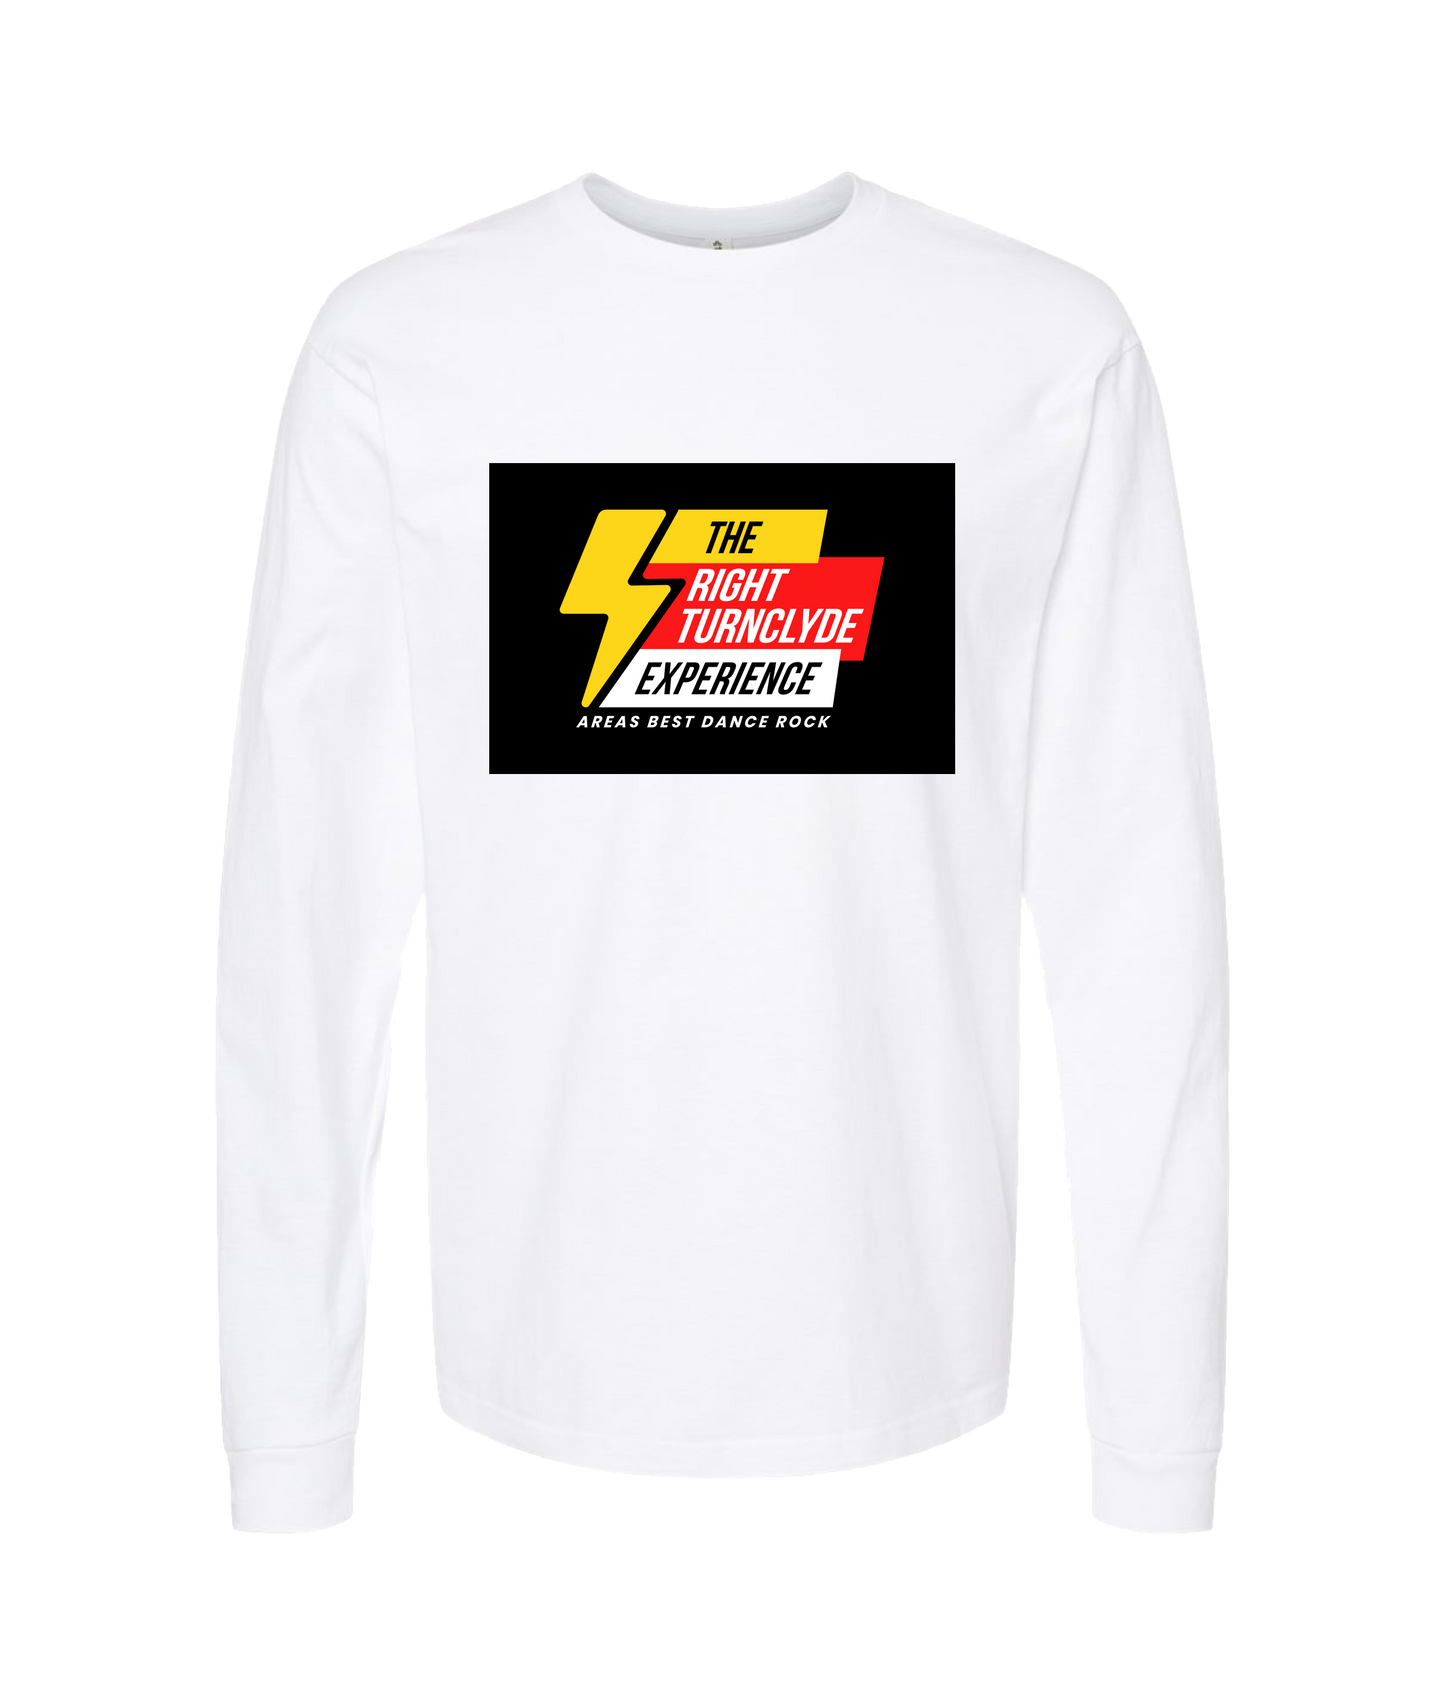 Right TurnClyde "Brucie Gear" Merchandise - The Experience - White Long Sleeve T